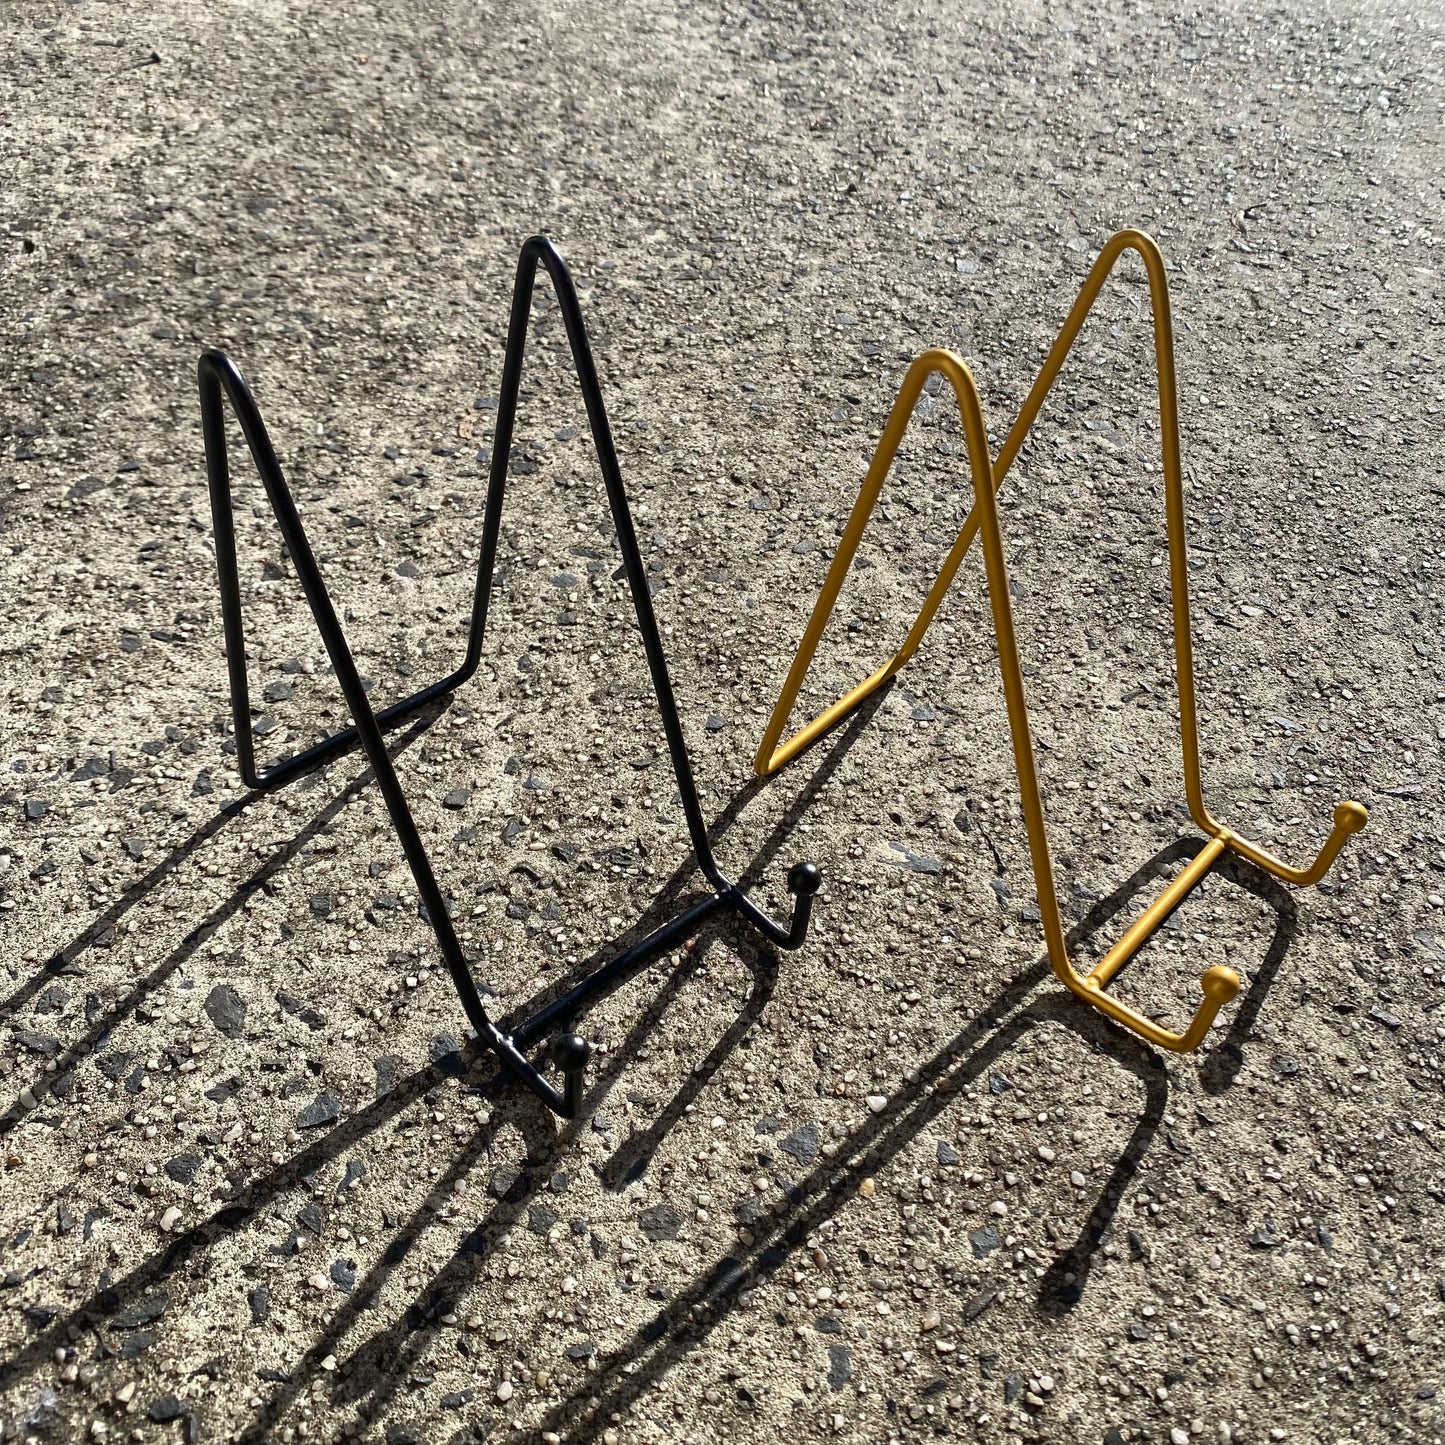 Iron Plate Stand - Gold